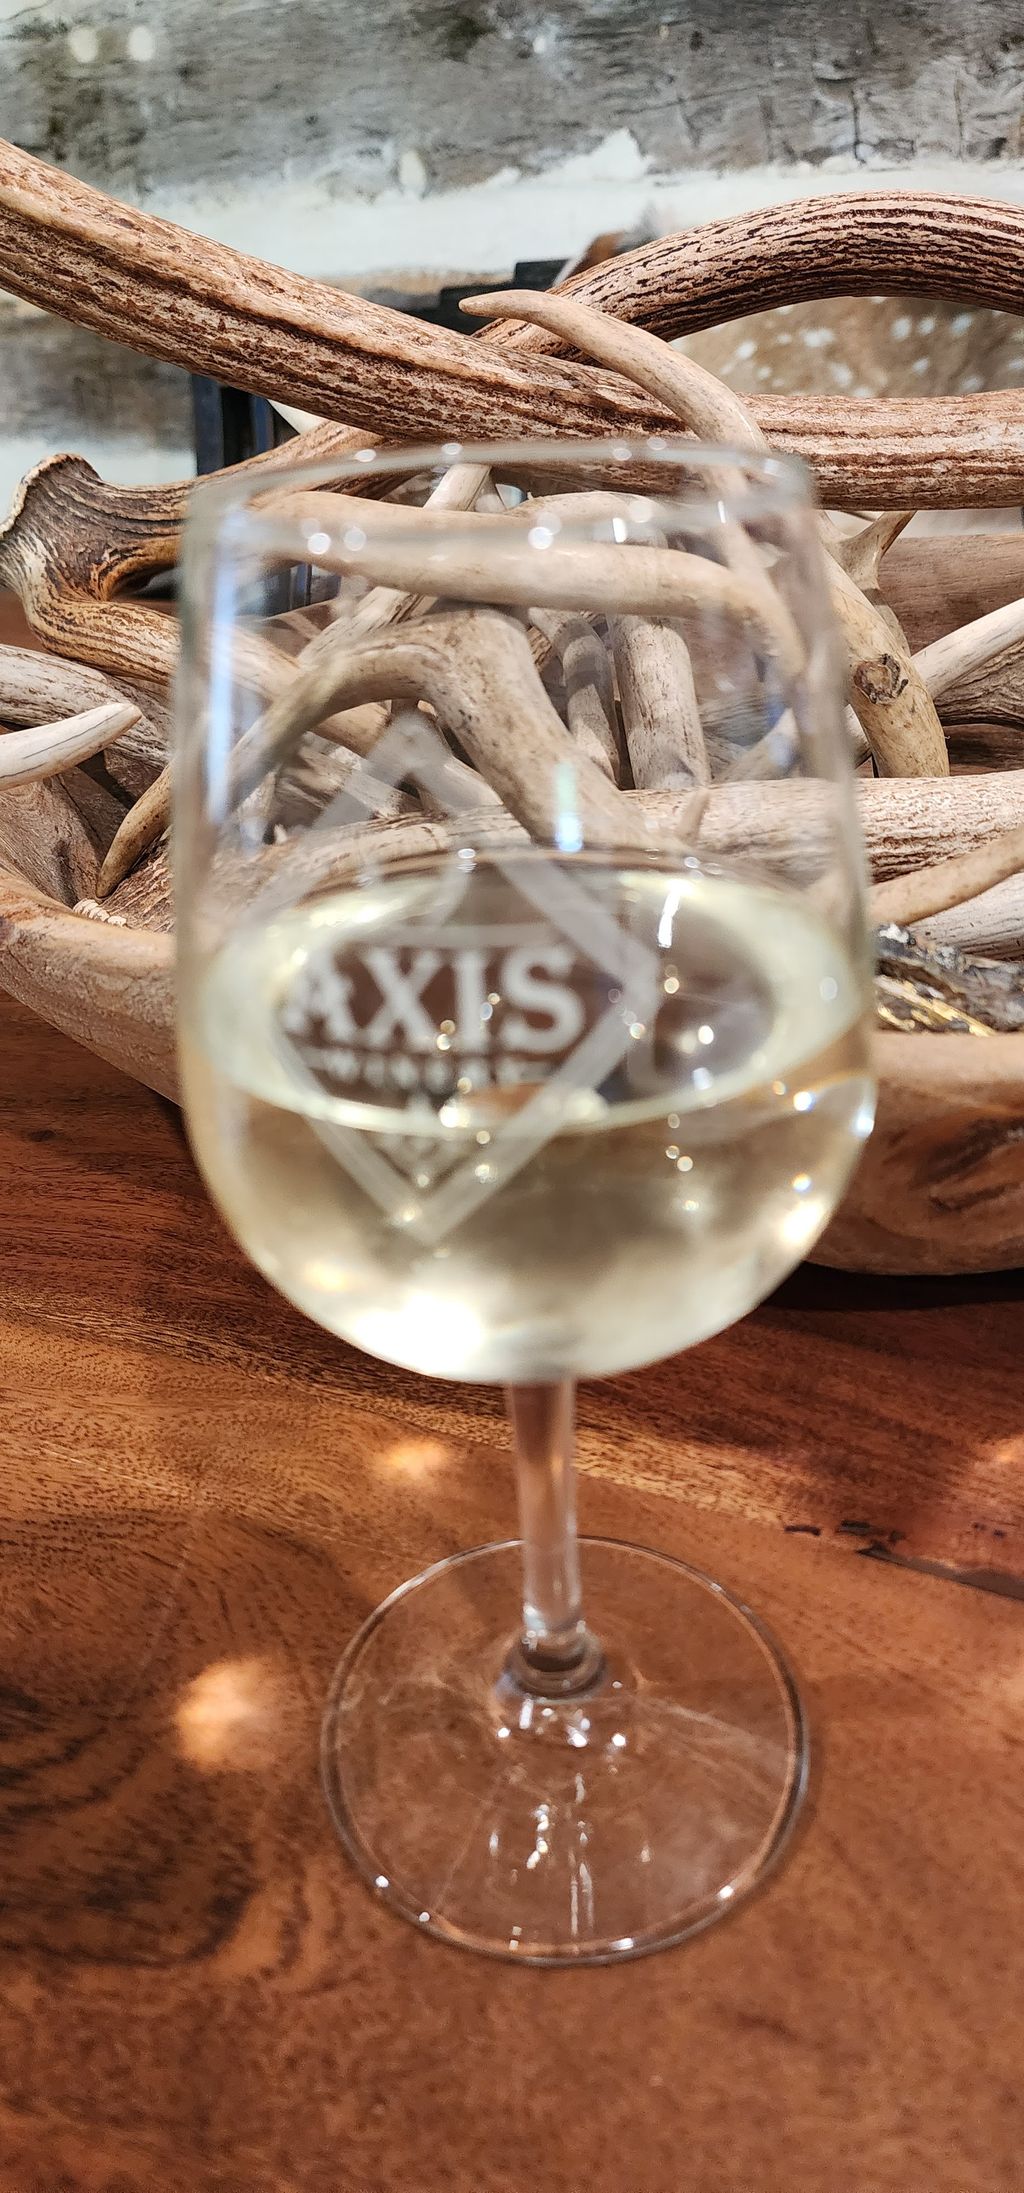 Axis-Winery